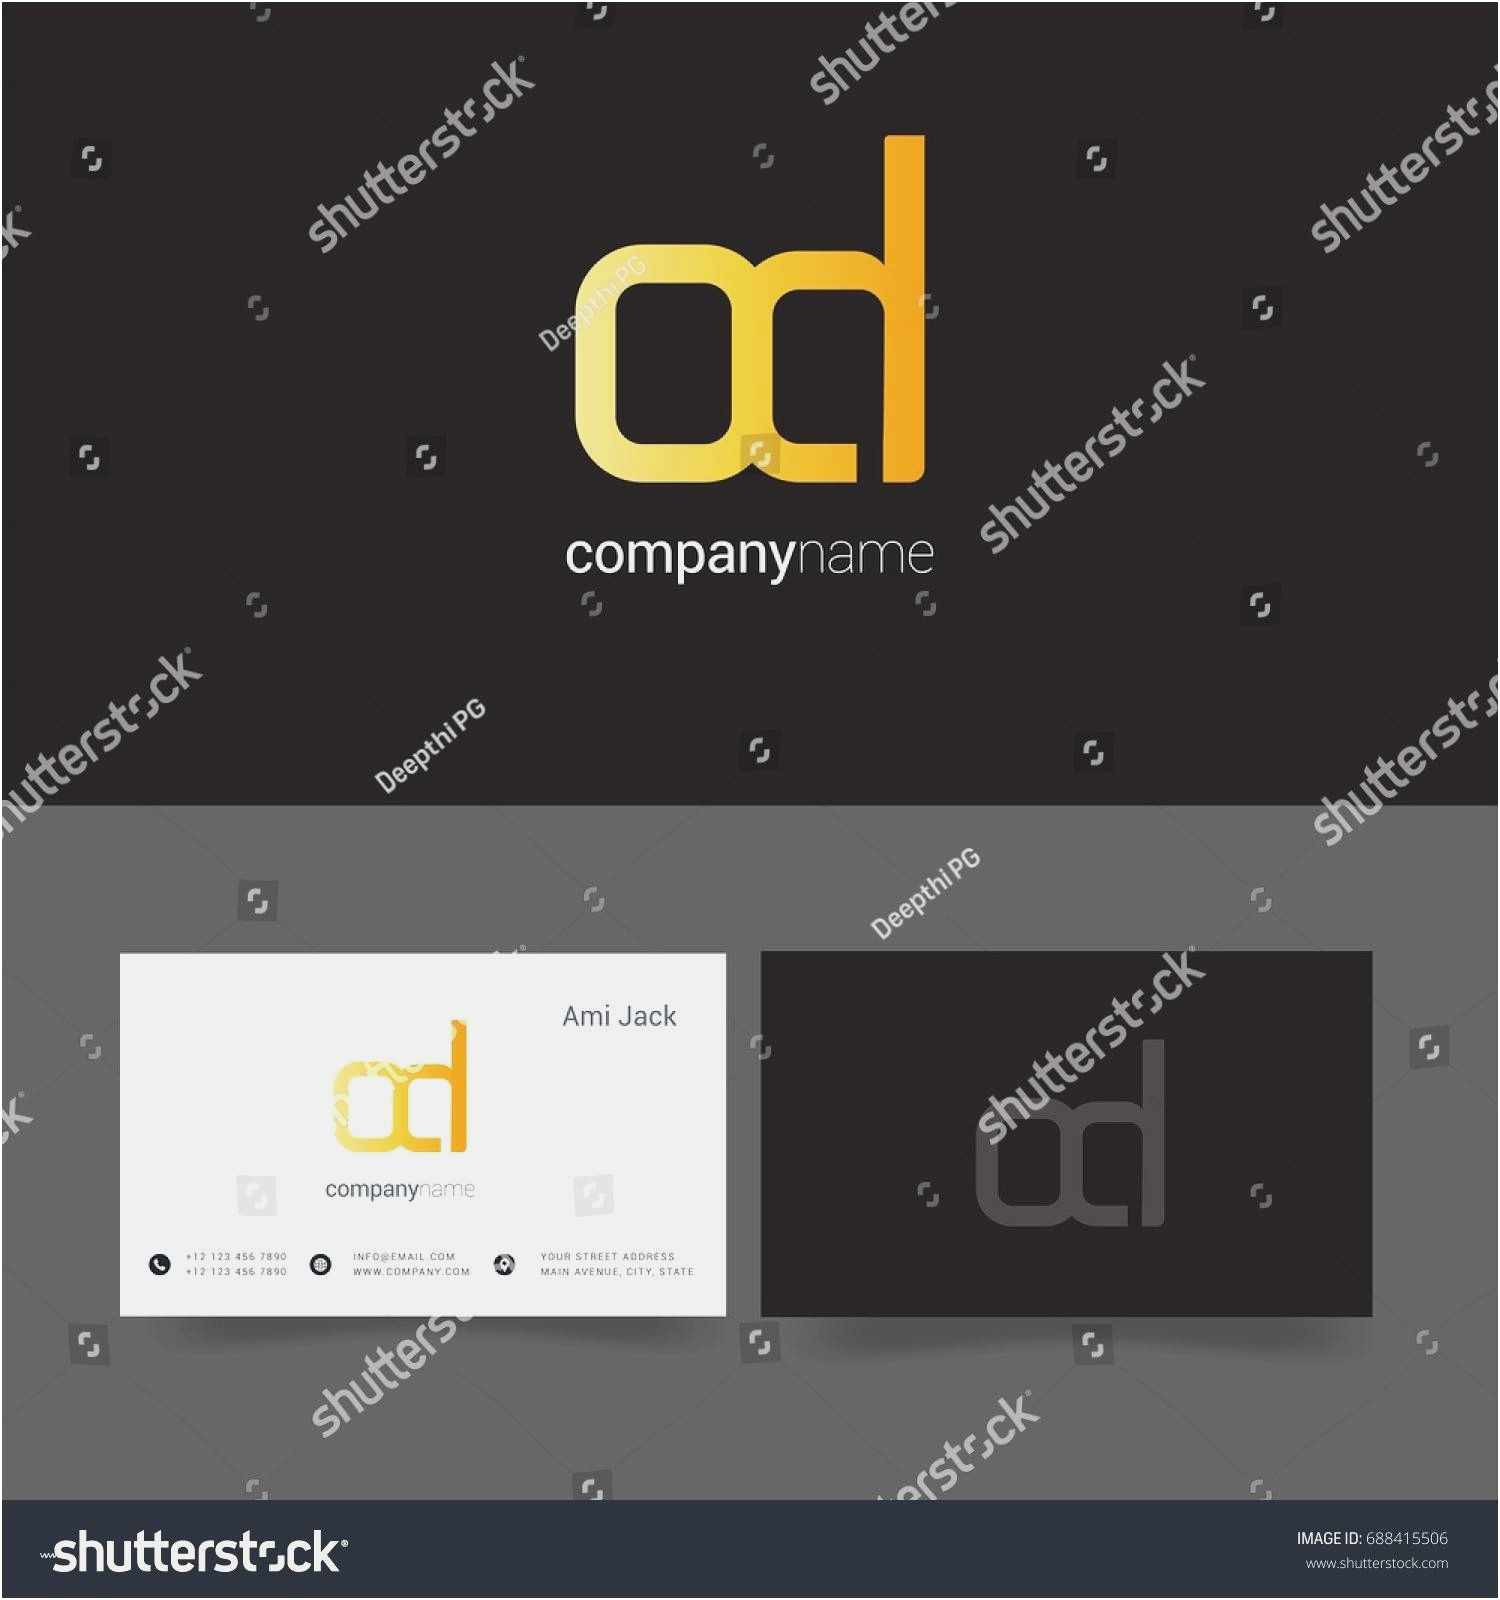 free awesome gallery free business card template in 2019 business cards format